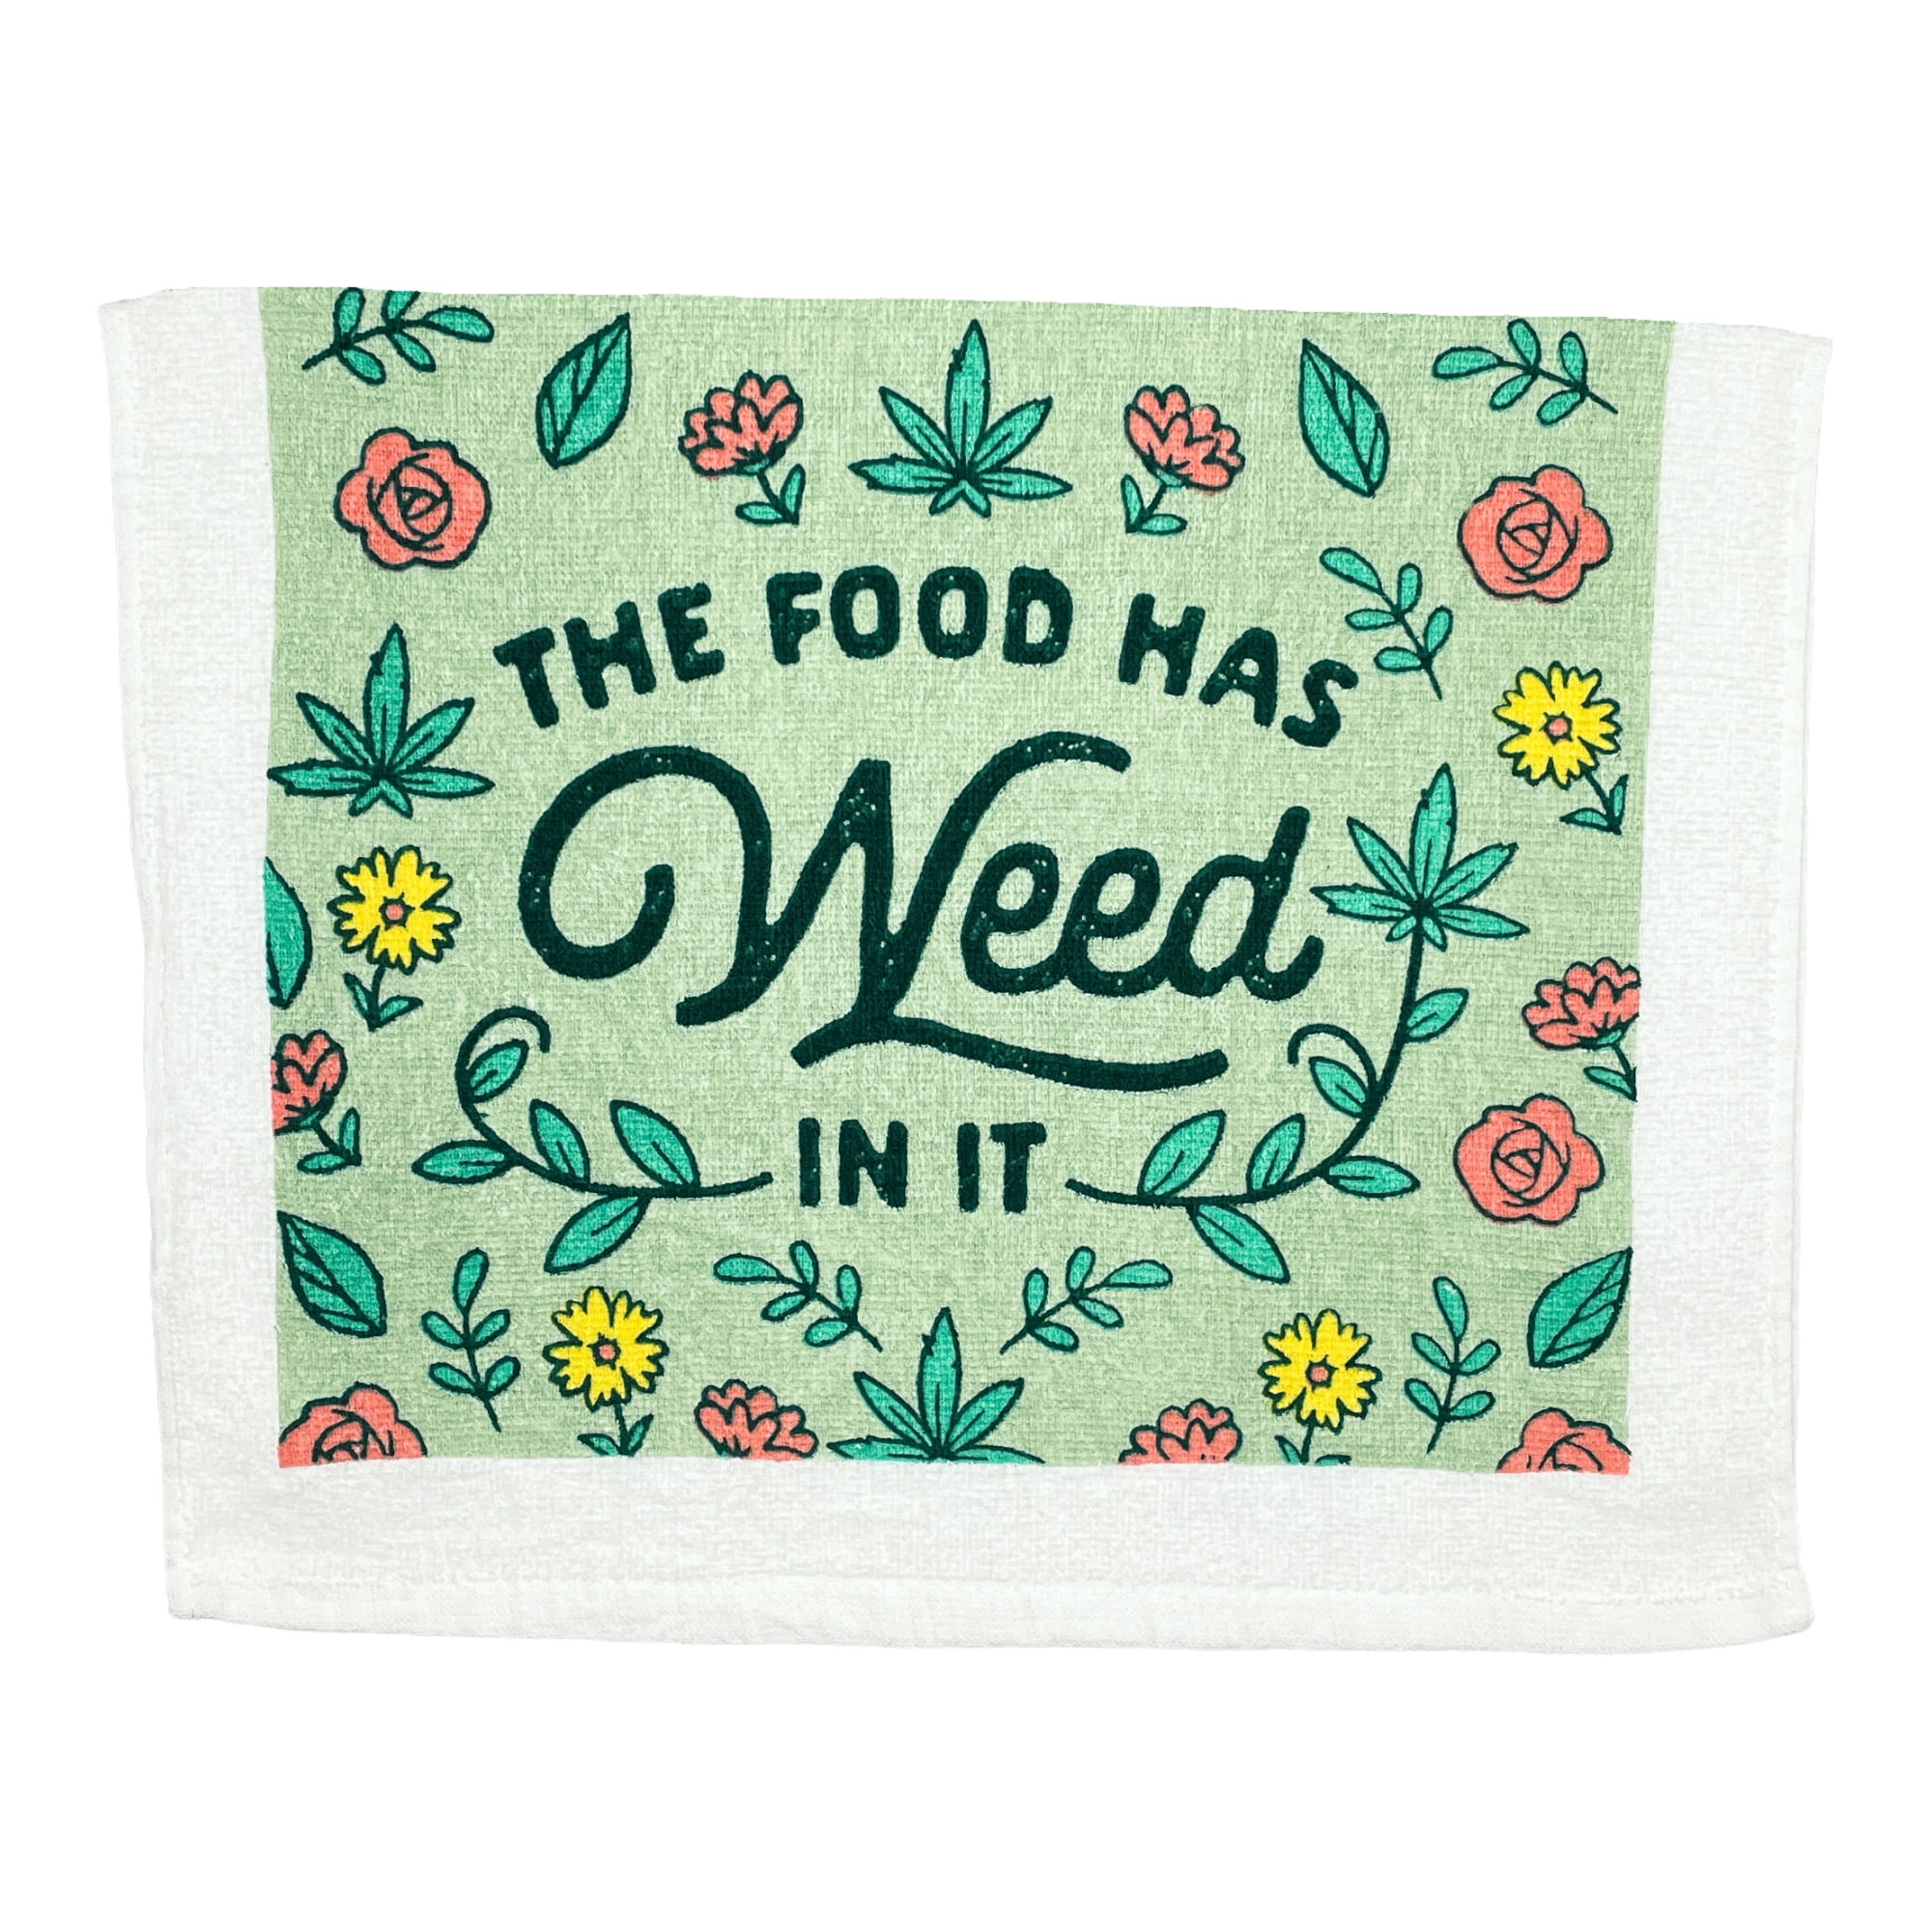 The Food Has Weed In It Funny Pot Kitchen Cooking Tea Towel 